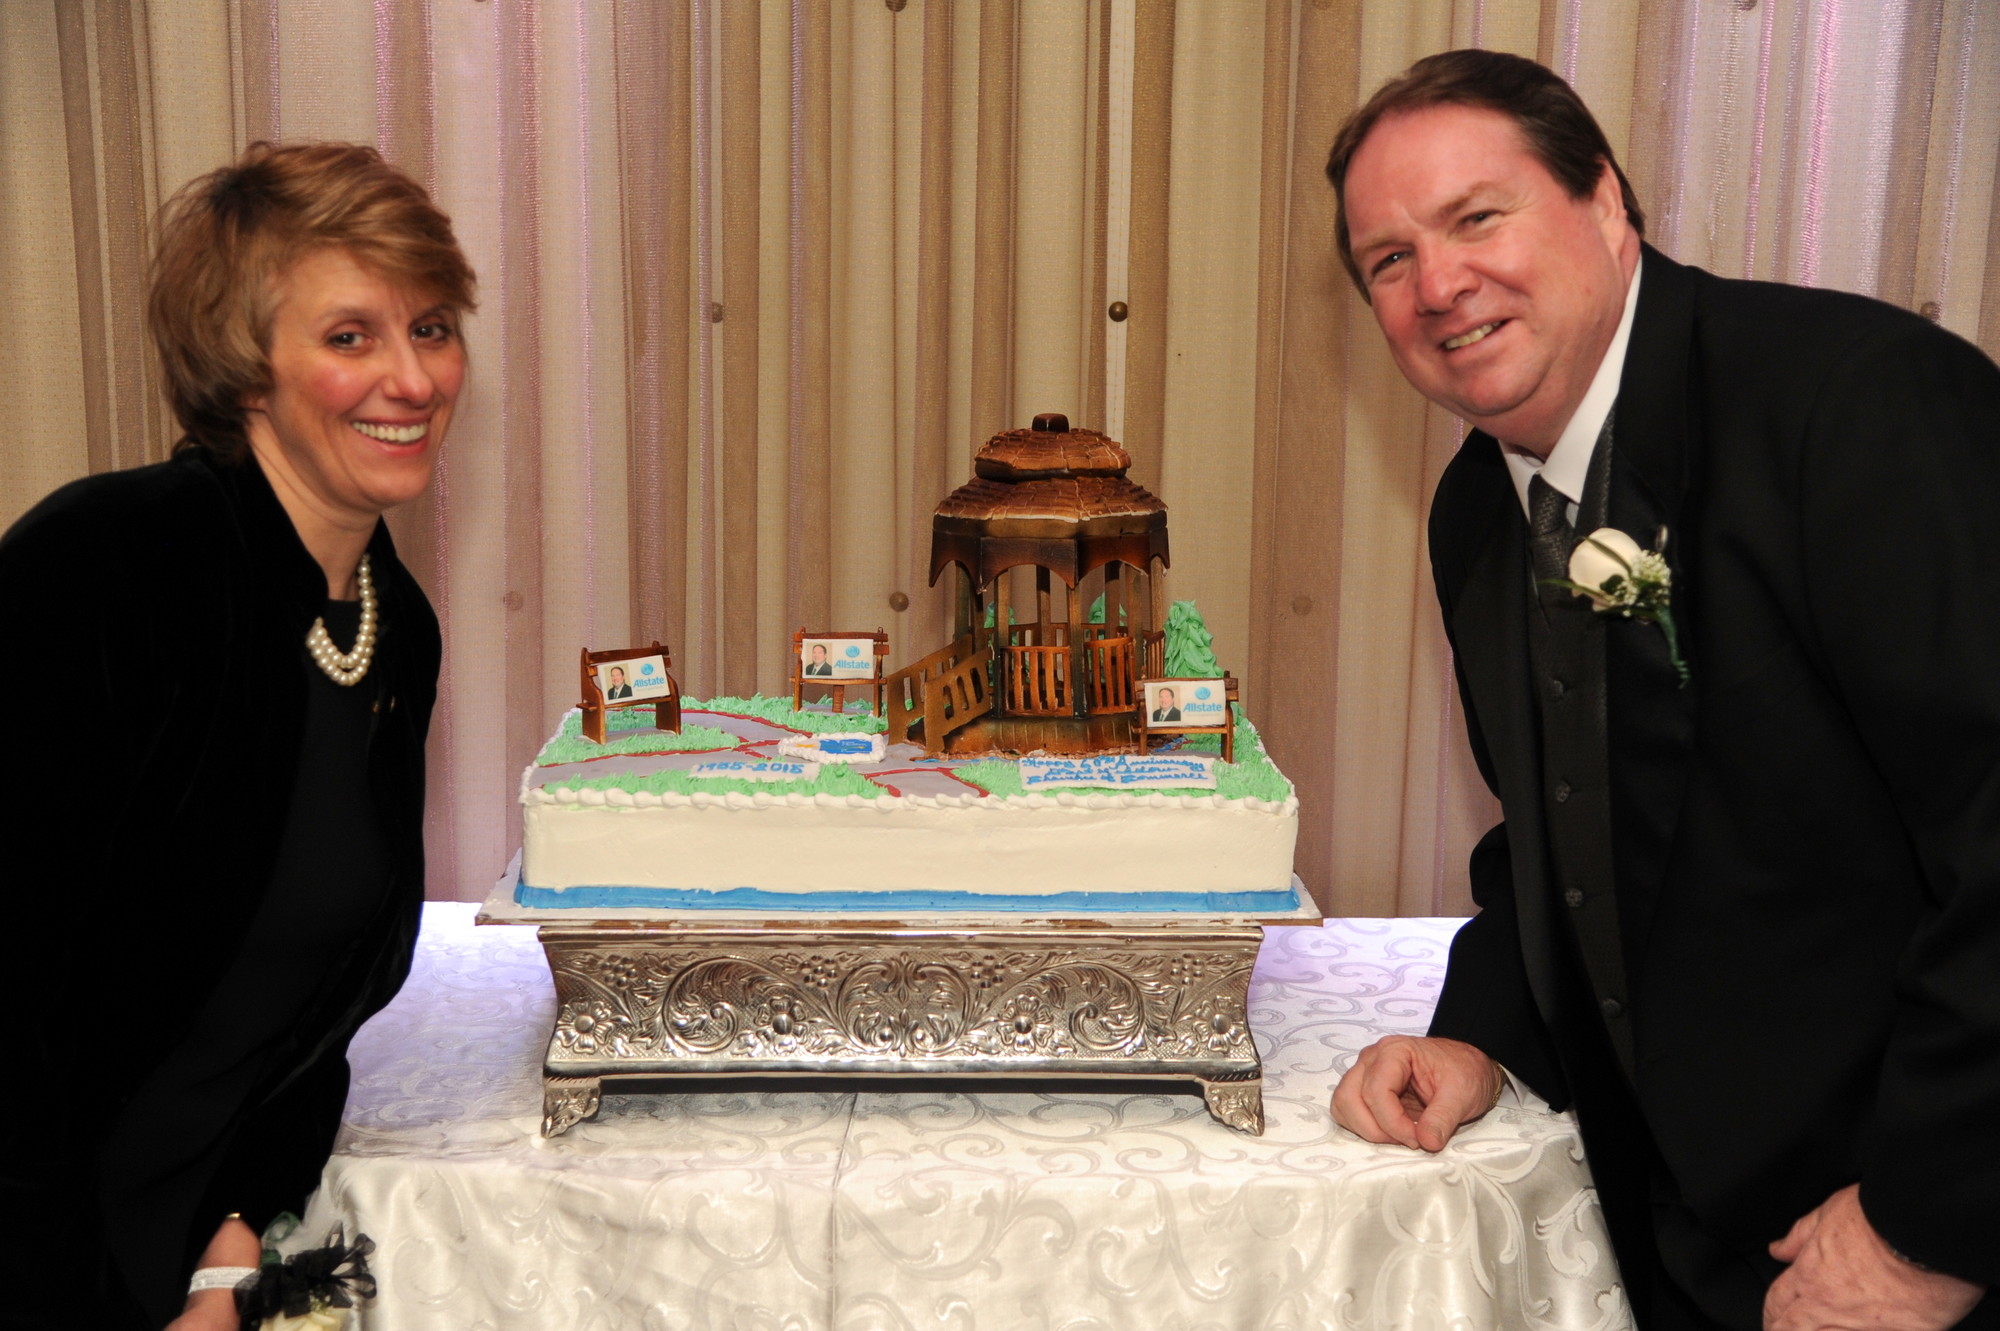 Walter Skinner, who the Chamber honored as Person of the Year, with Rose Fuger of a Taste of Home, admired a cake designed to replicate Veterans Memorial Park in East Meadow,